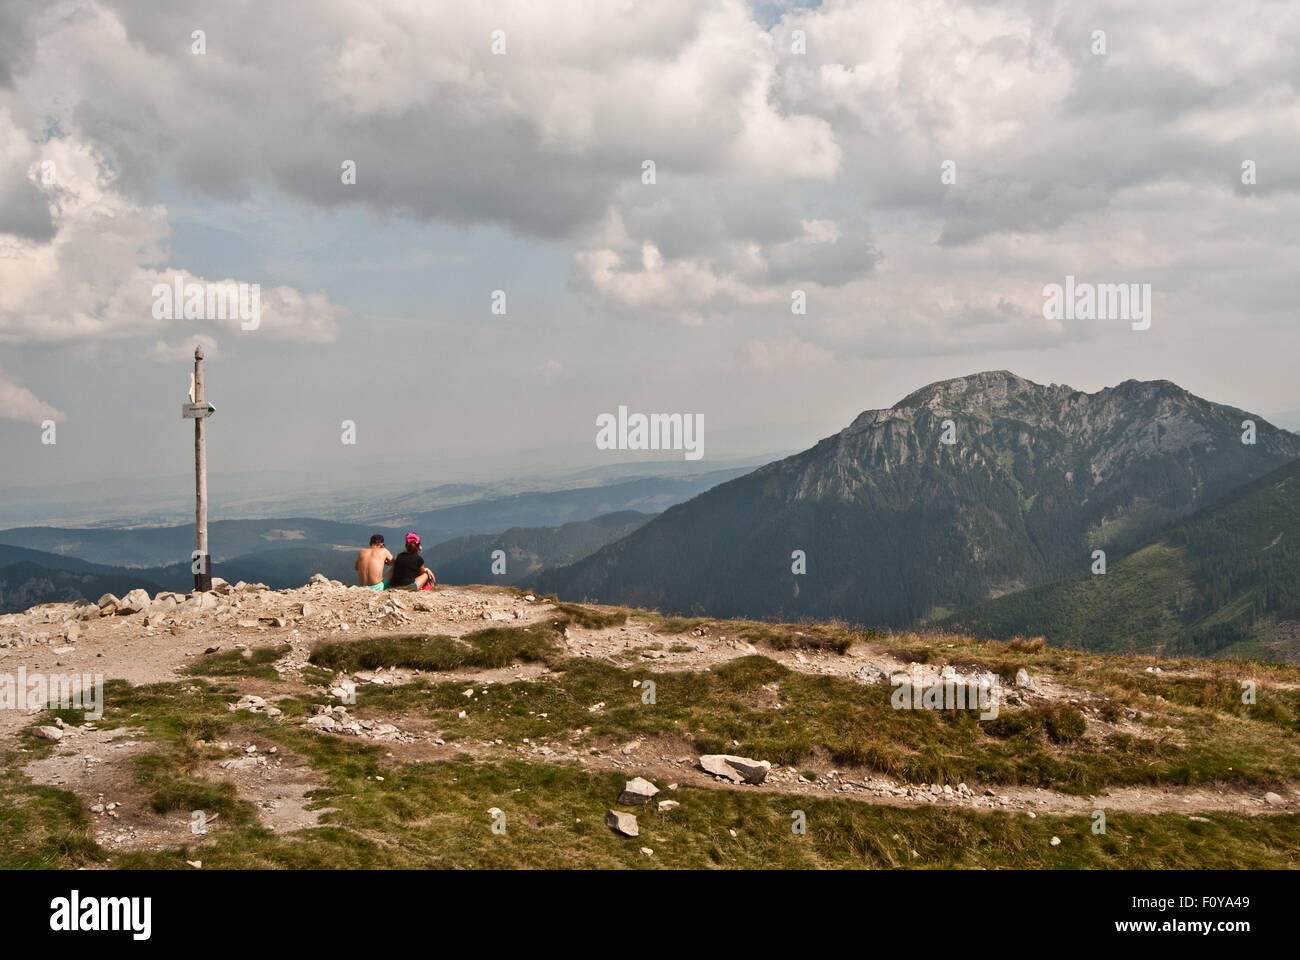 relaxing hikers on the Trzydniowianski Wierch summit in Tatry mountains Stock Photo